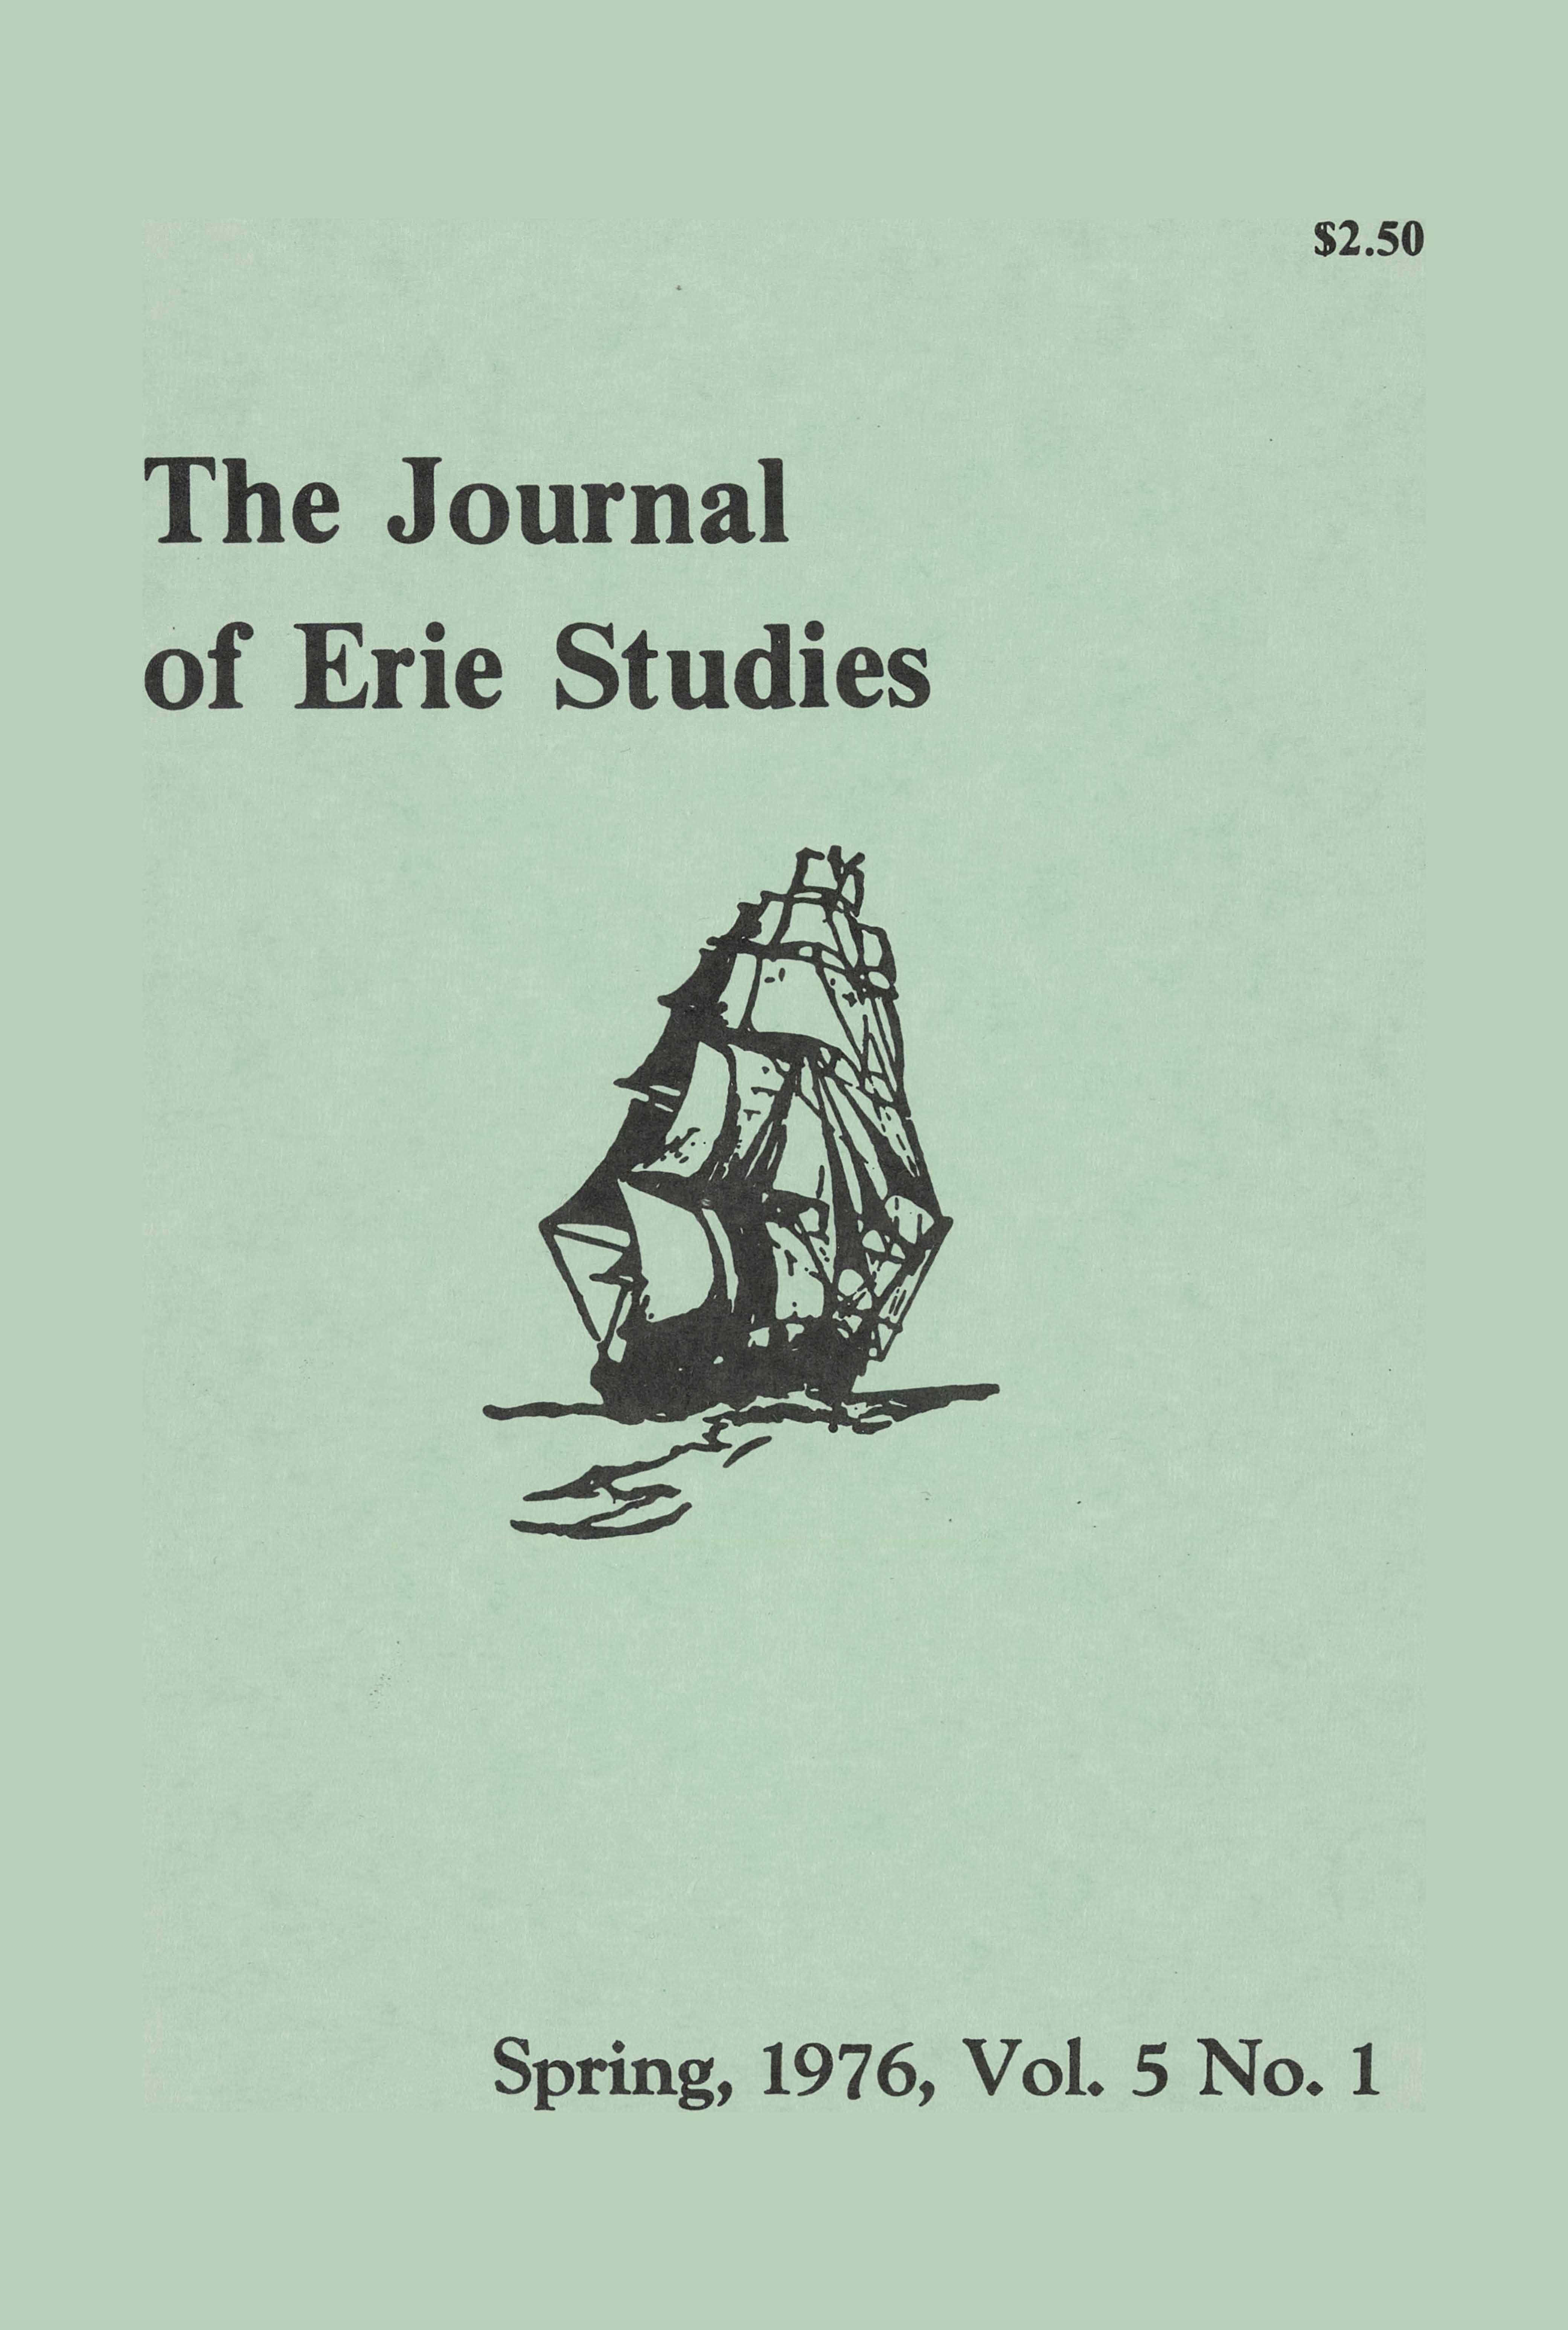 Sketch of a ship with the text, "The Journal of Erie Studies, Spring, 1976, Vol. 5, No. 1."